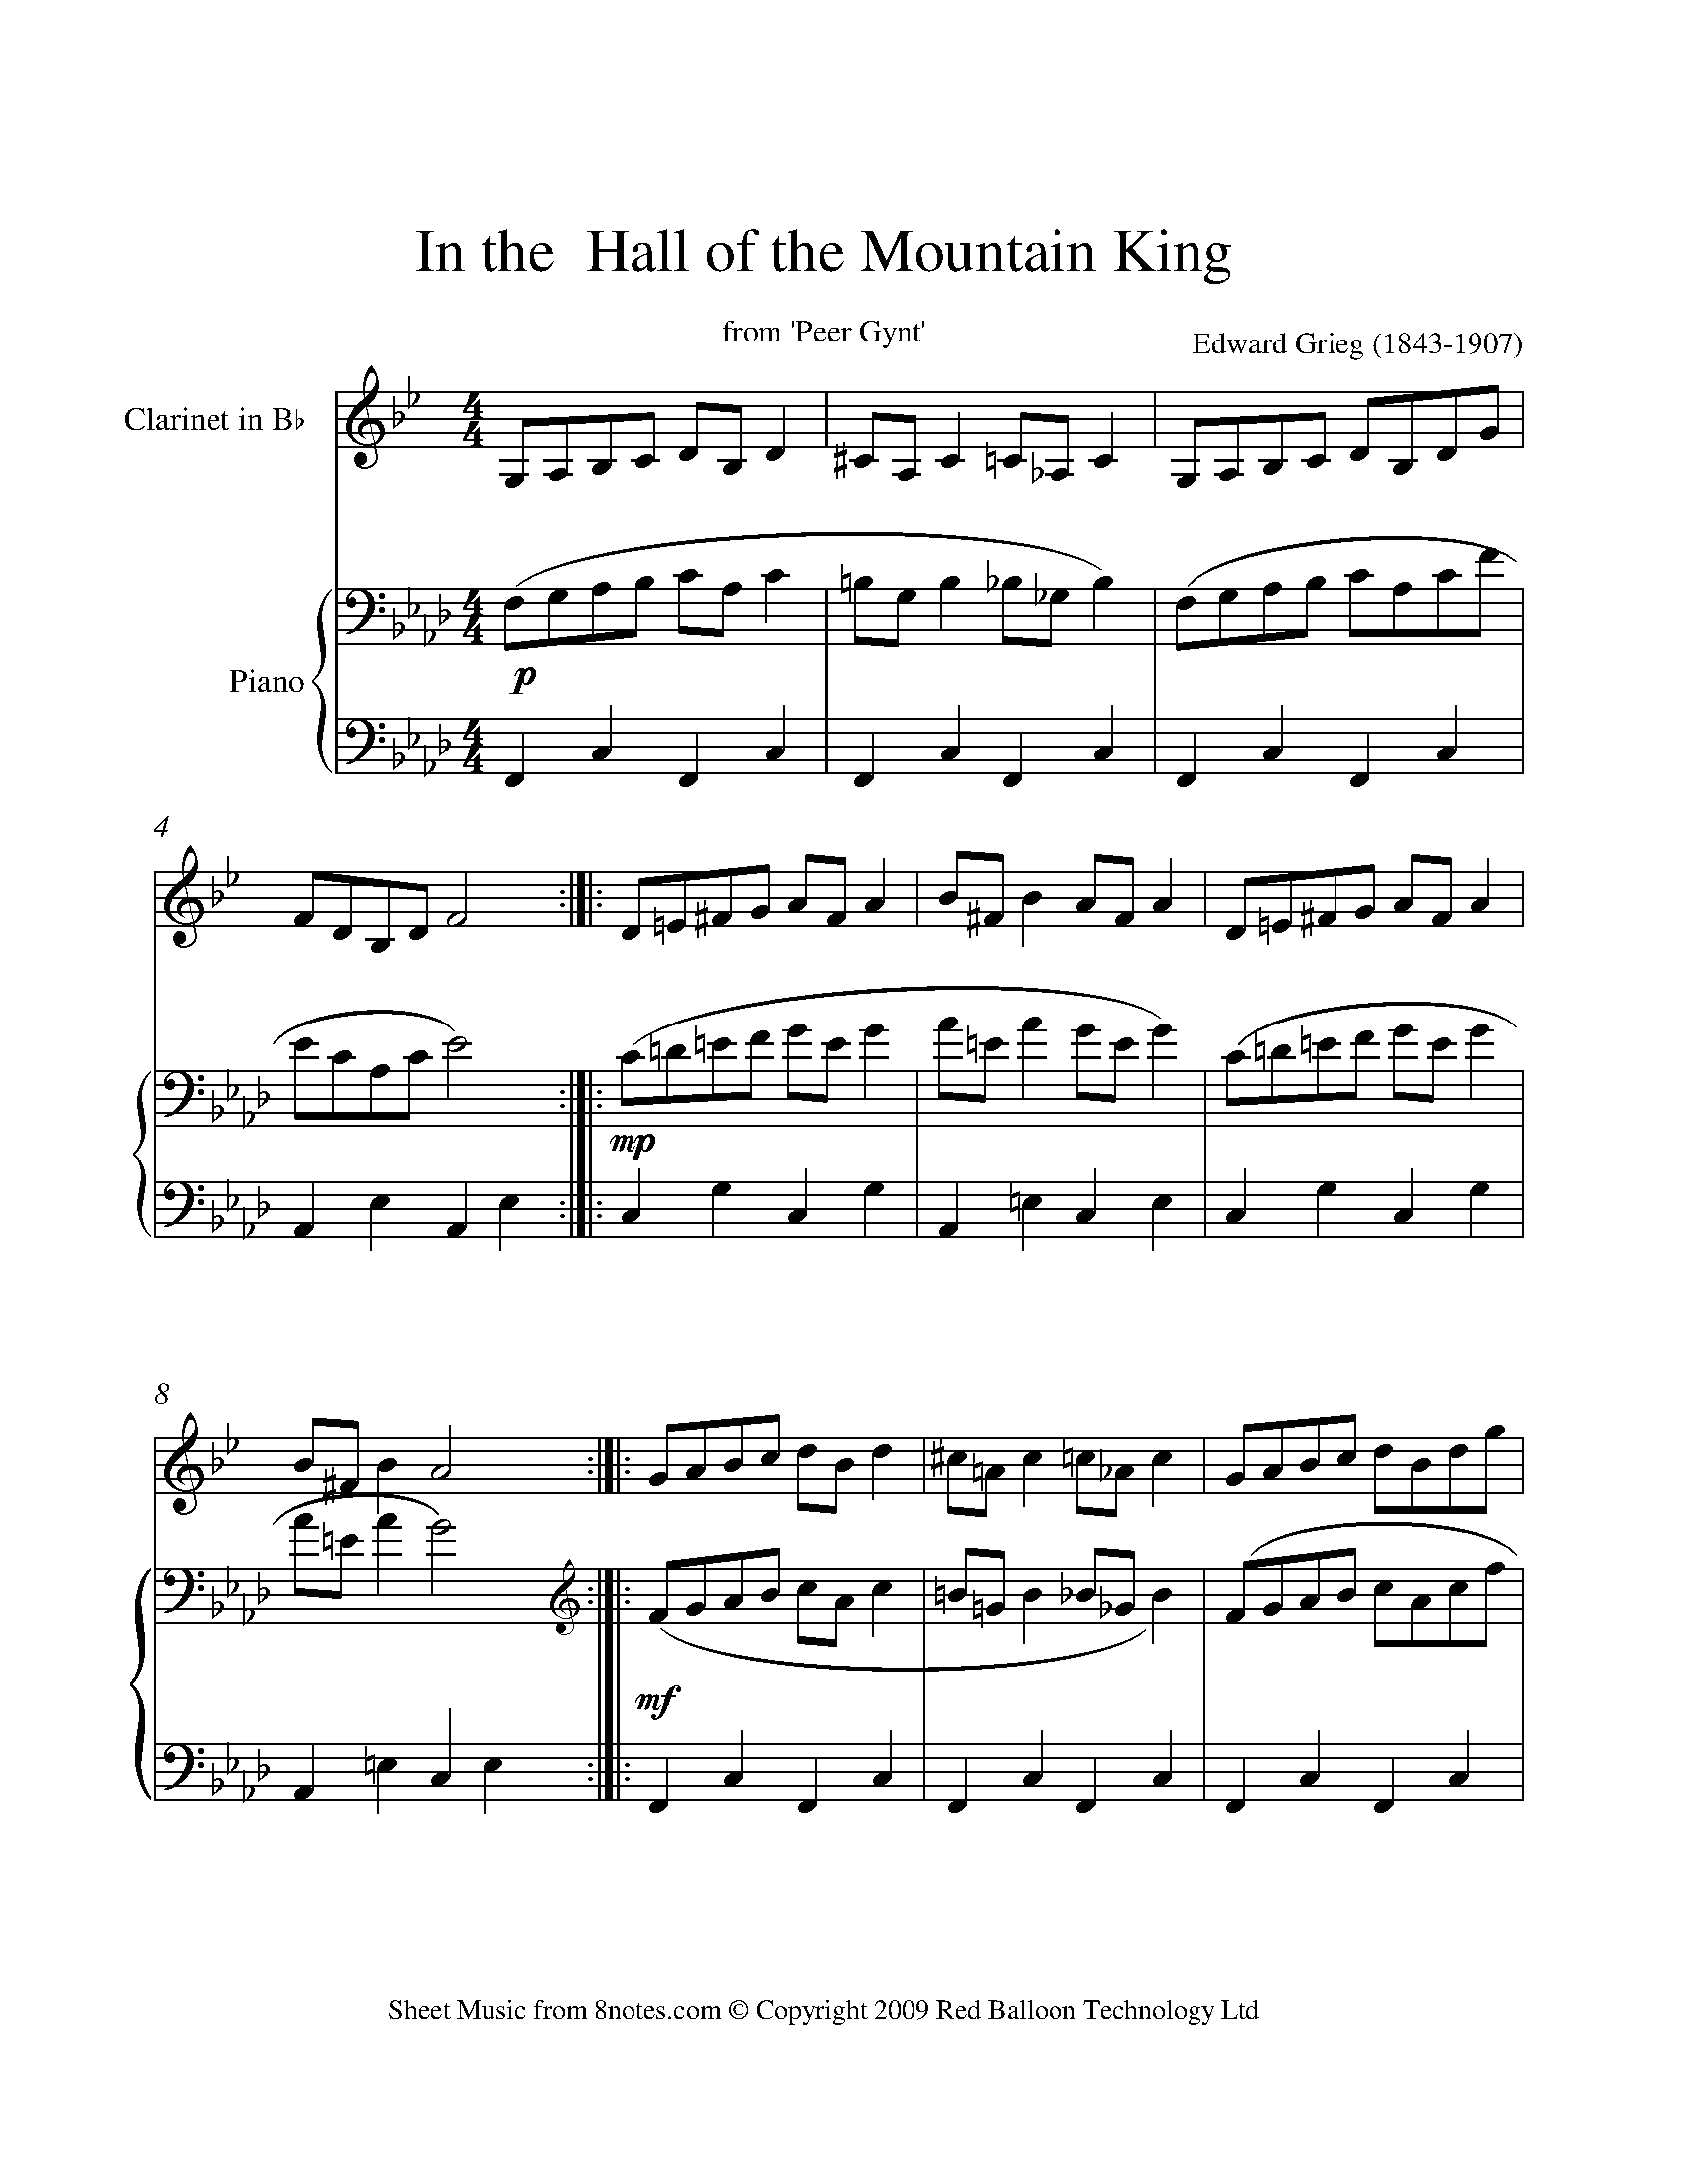 Grieg - In the Hall of the Mountain King Sheet music for Clarinet